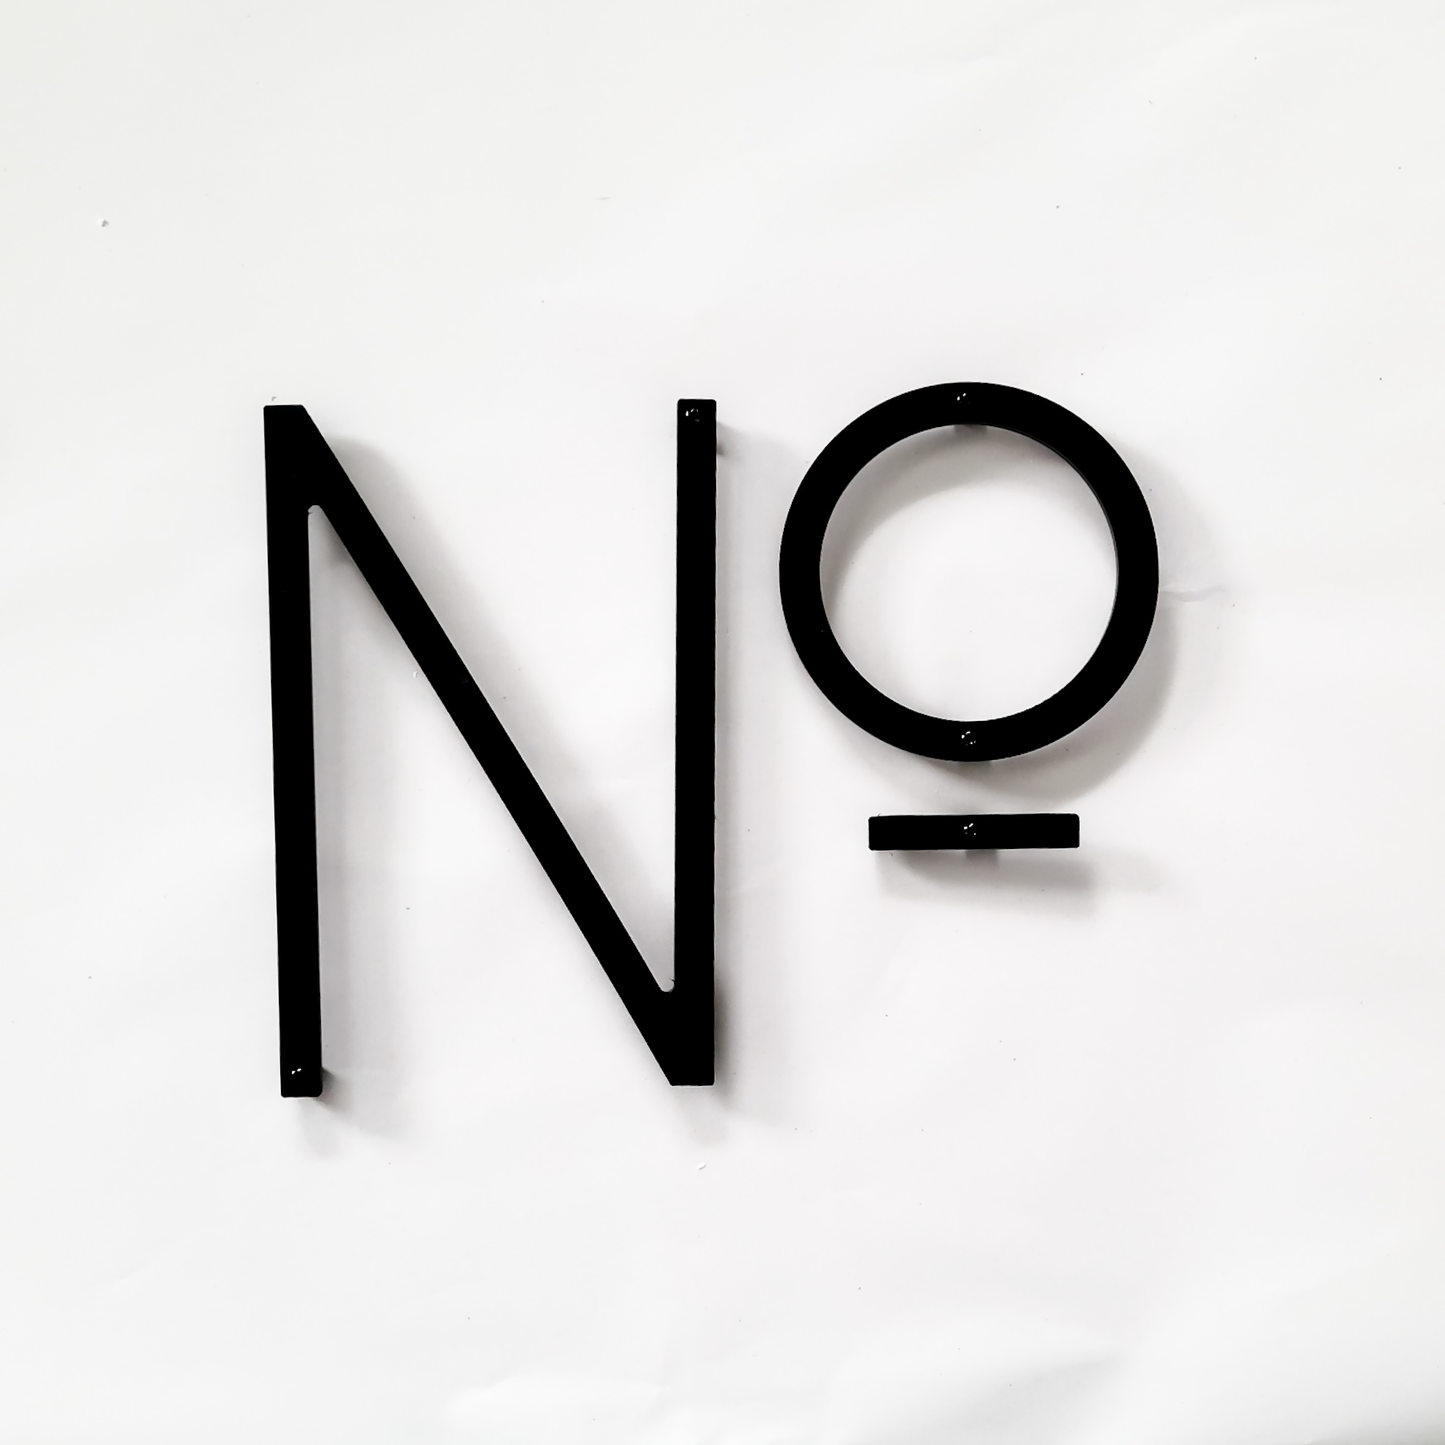 6 inch THIN MODERN house numbers and letters